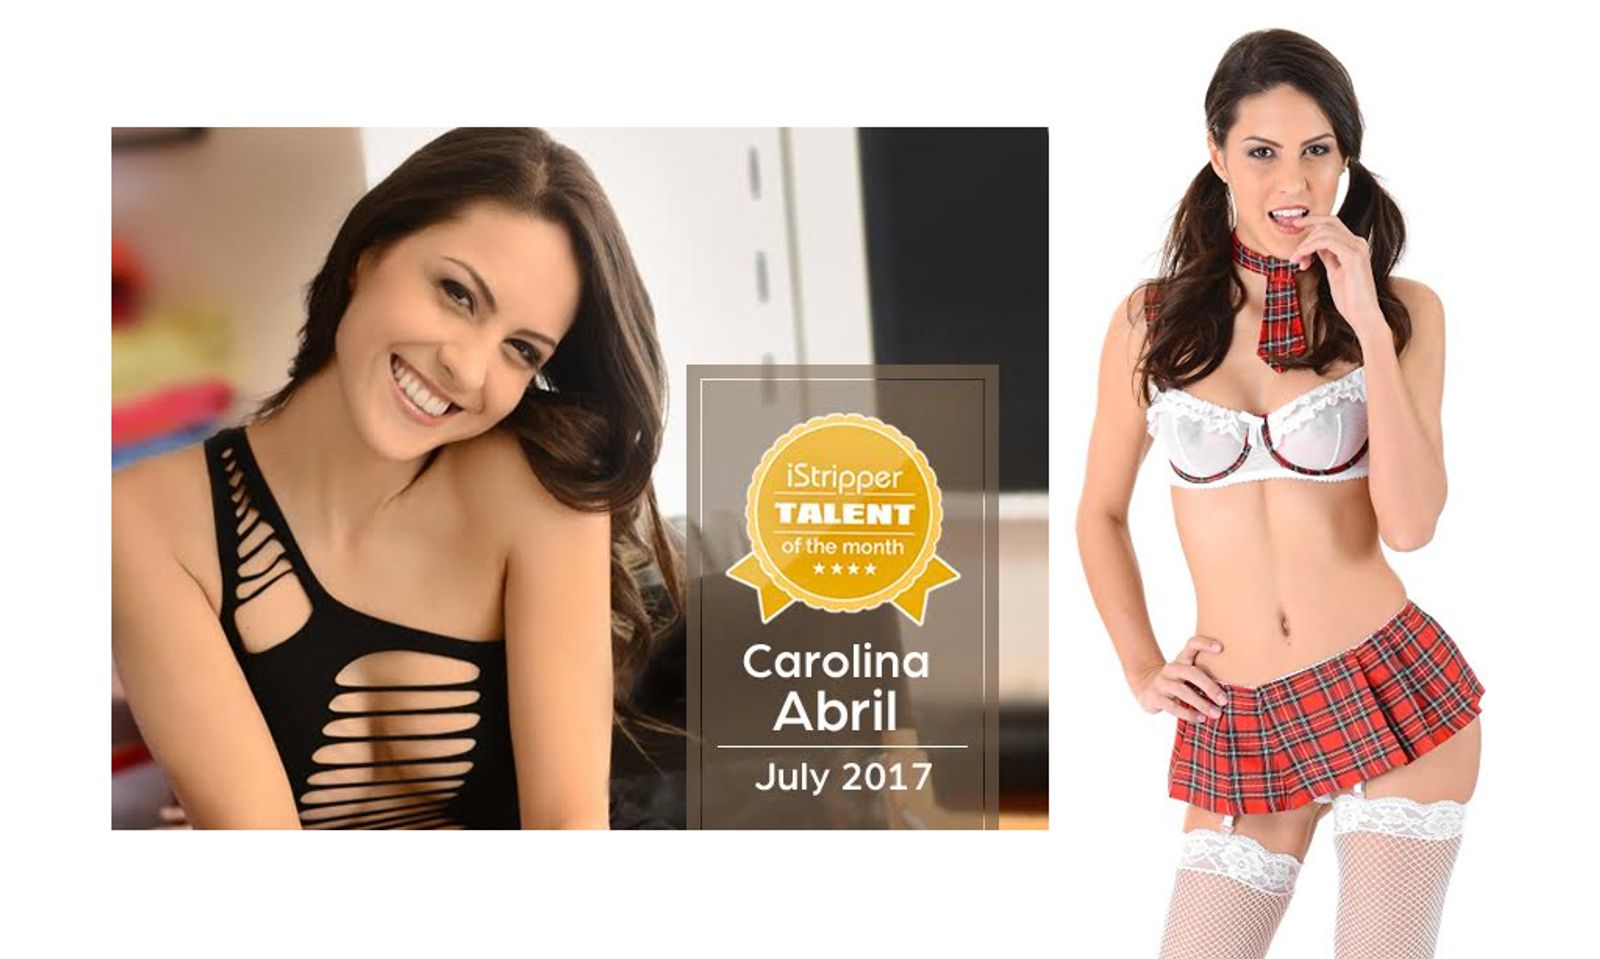 Carolina Abril Named iStripper's Talent of the Month for July